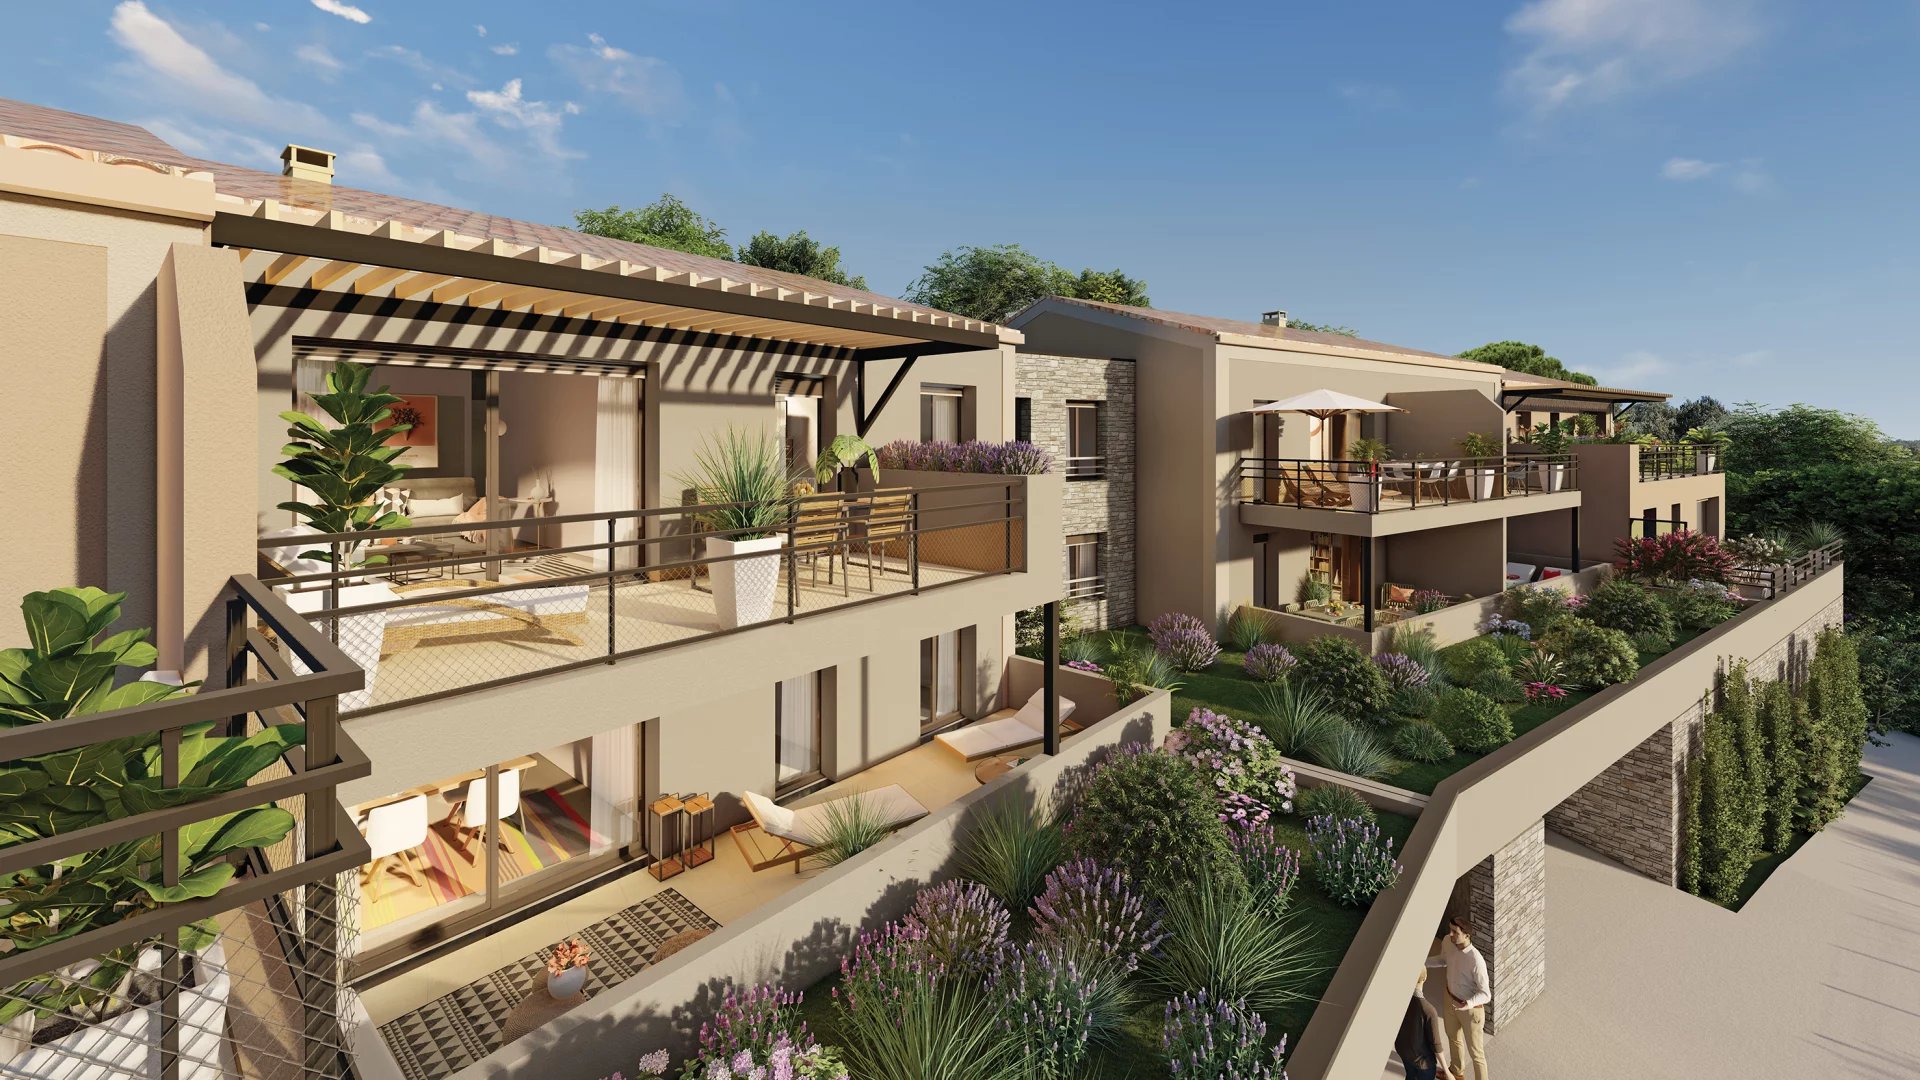 New 3-bedroom apartment with terrace - Carcès